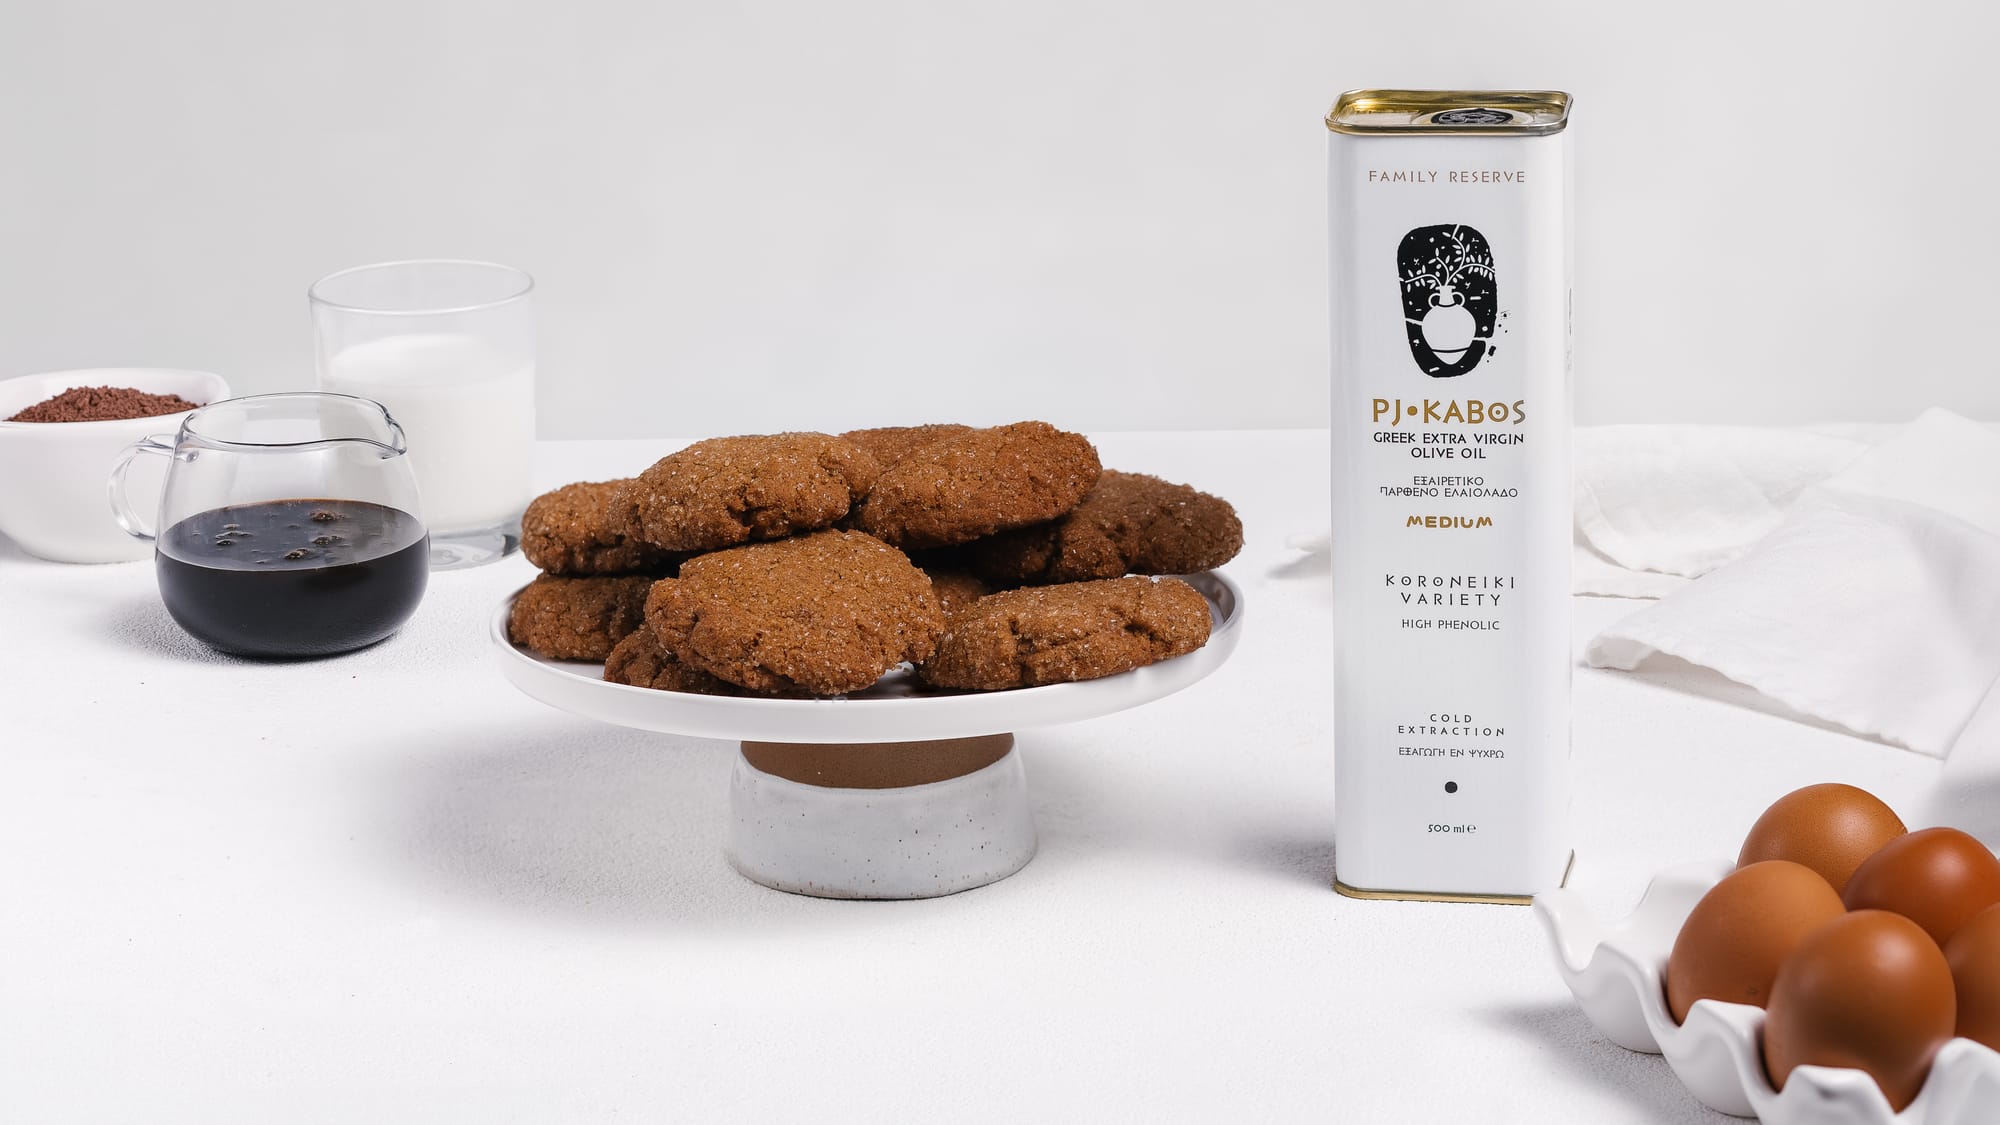 PJ KABOS Extra Virgin Olive Oil, eggs, flour, molasses, sitting on a tale around a plate of freshly baked ginger snap cookies.